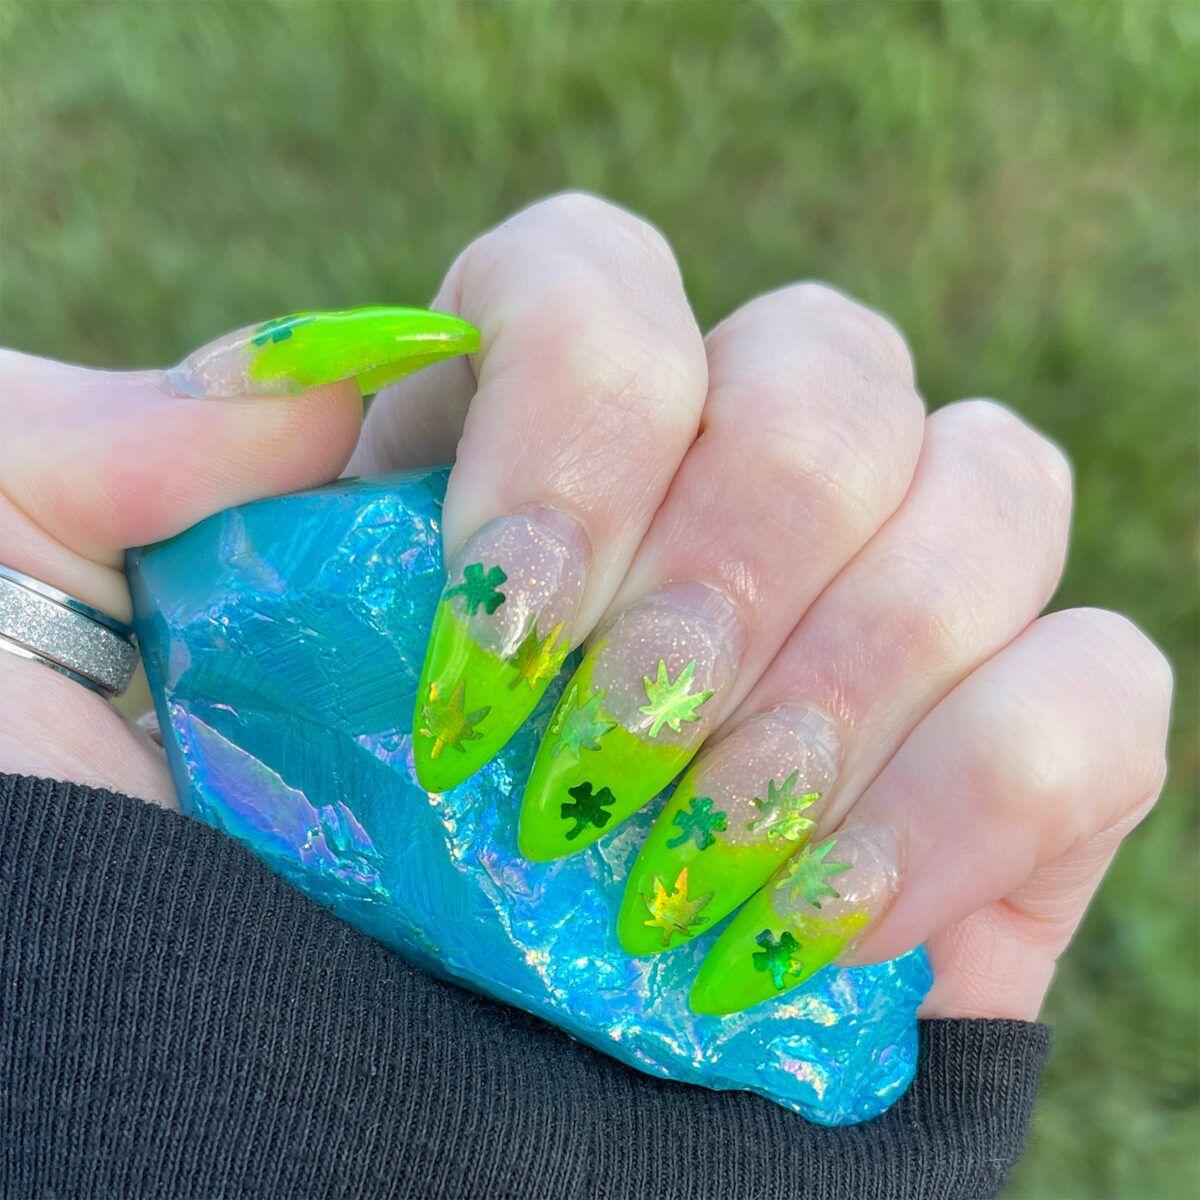 How to Create St. Patricks Day Inspired Nails